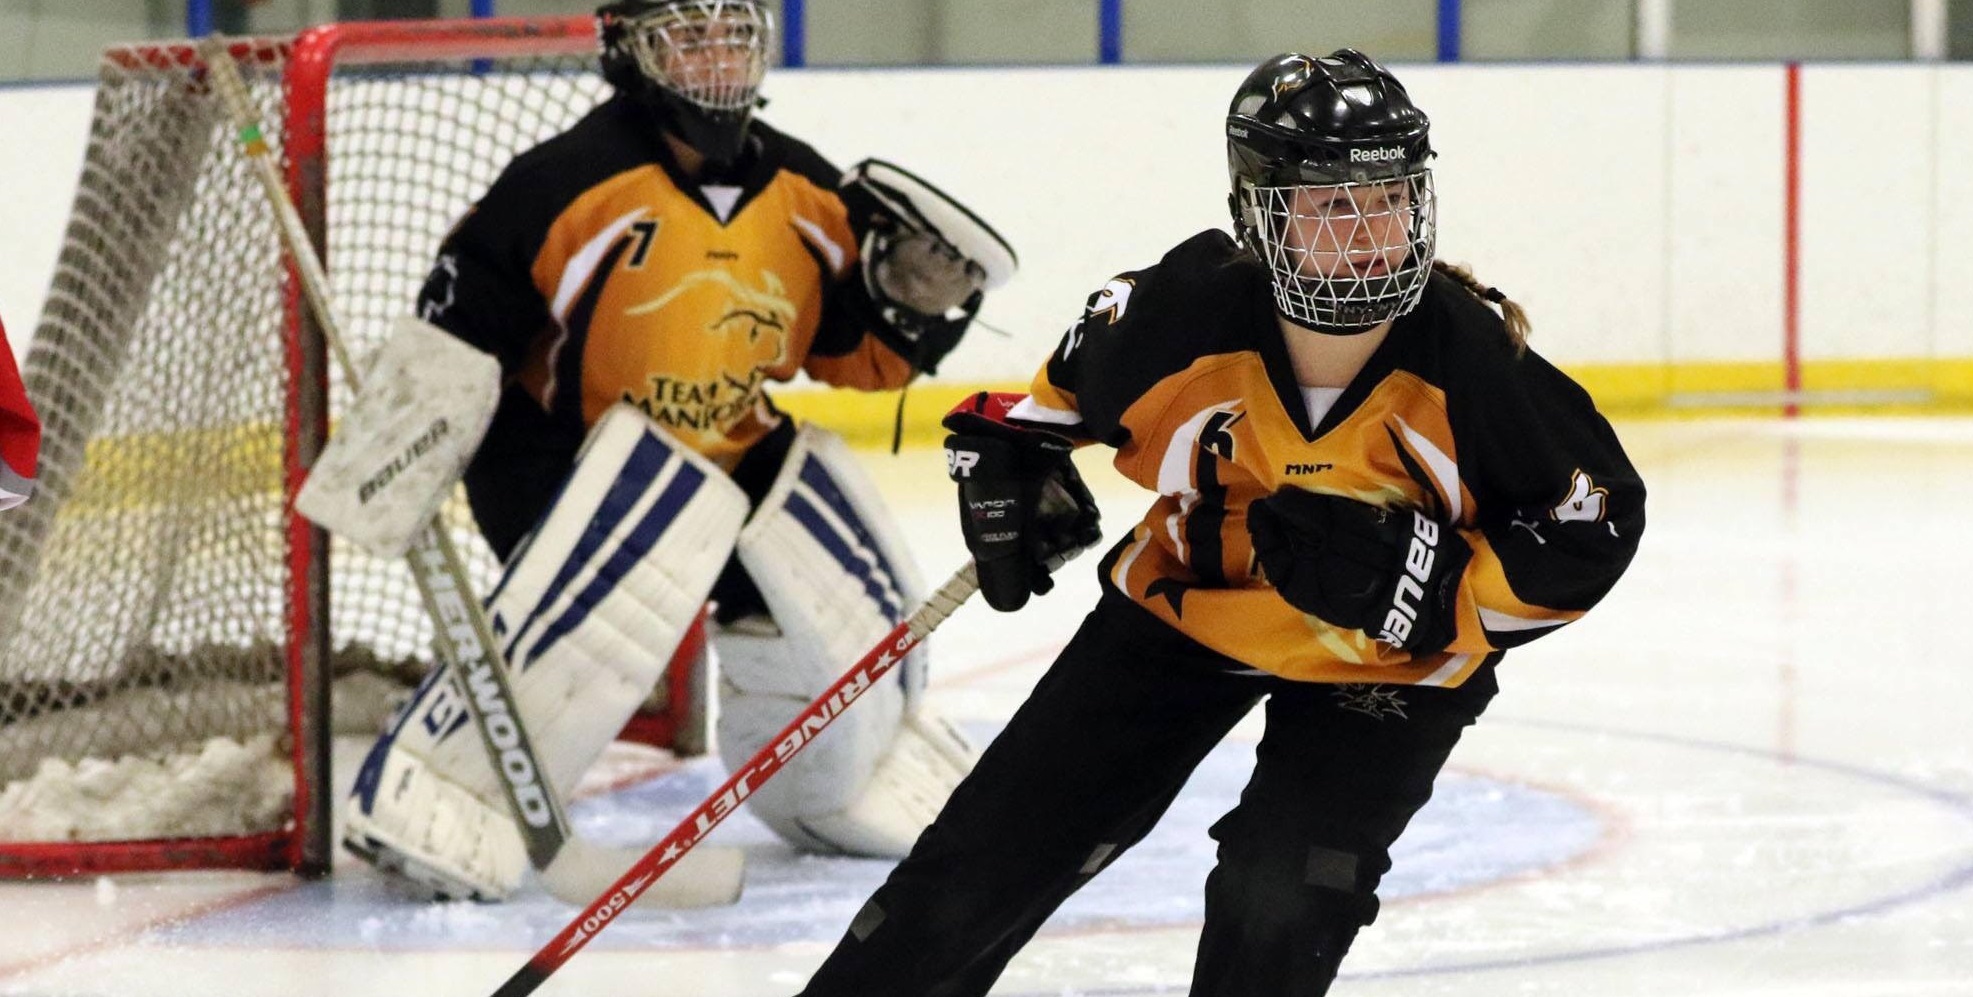 1 Local Ringette Player Skates Her Way To Canada Games Pic